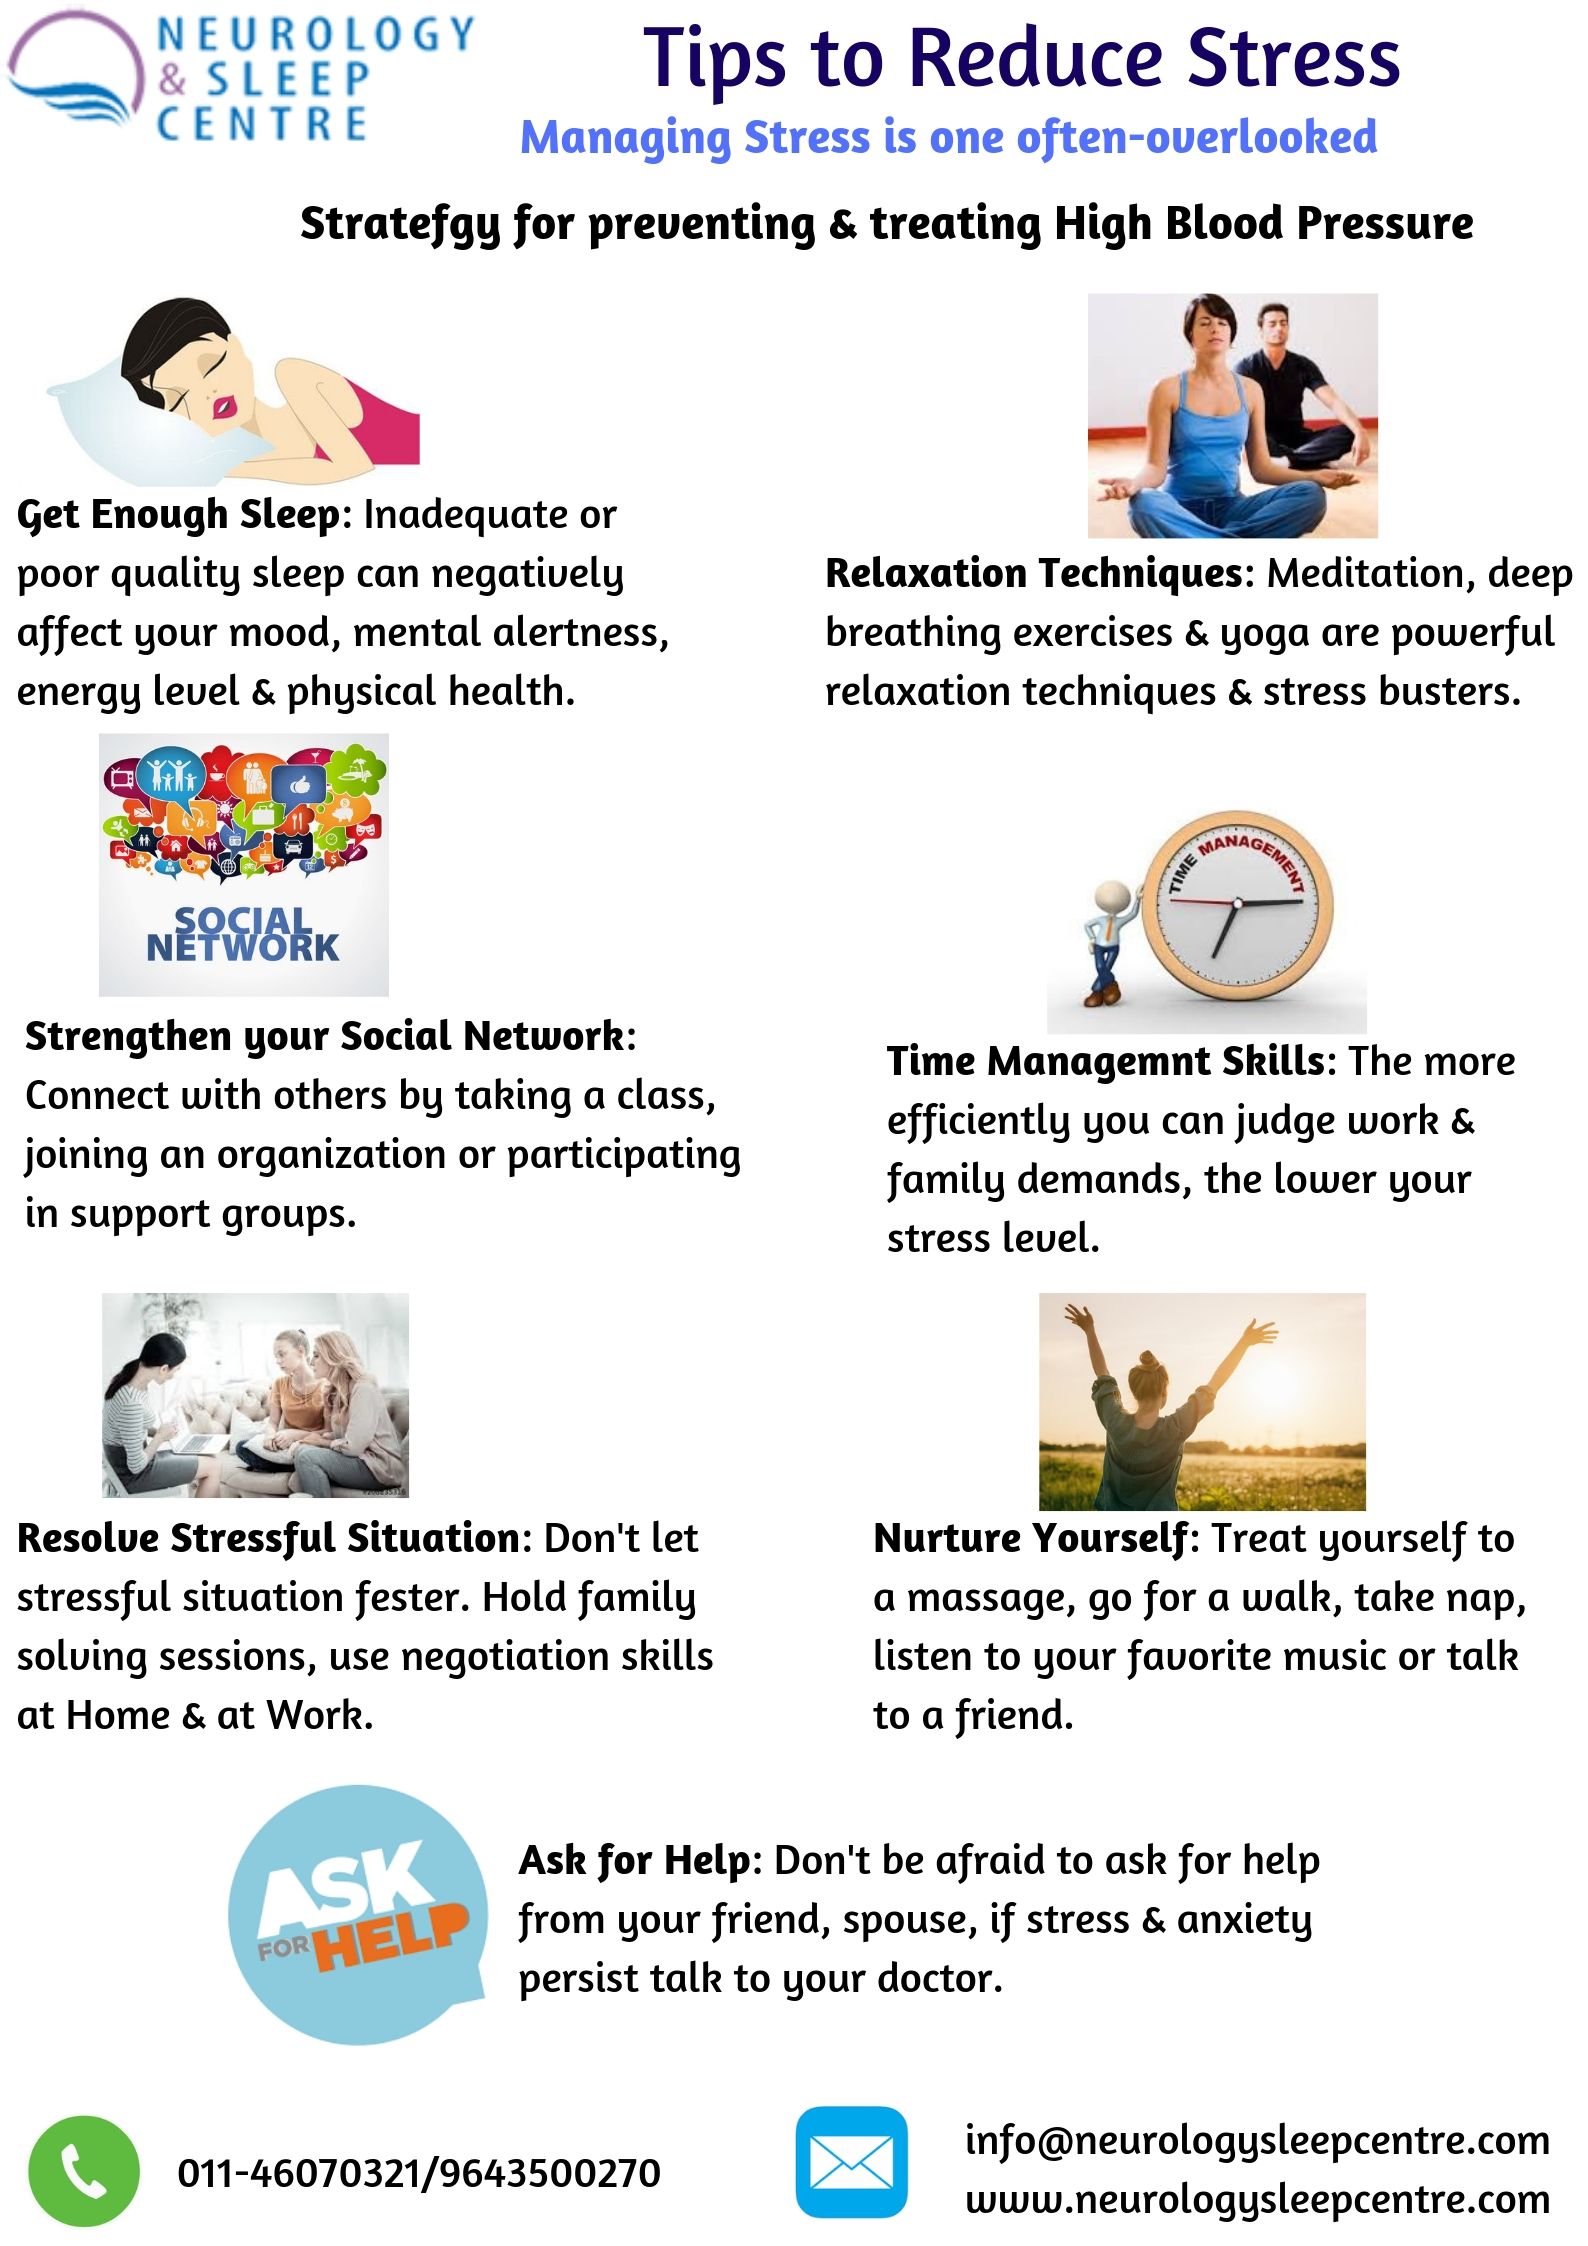 Seven Ways to Reduce #Stress